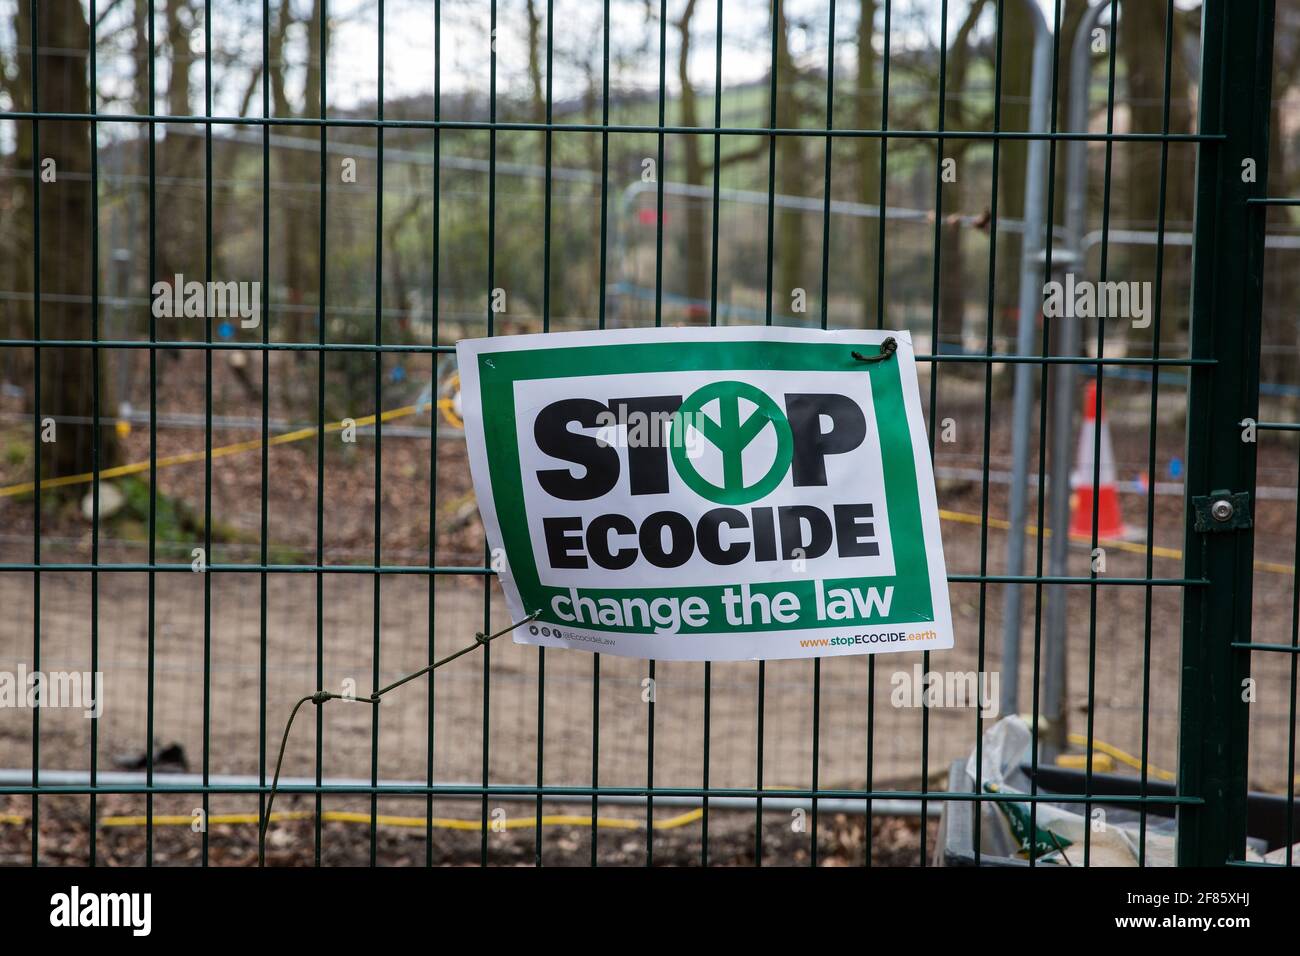 Wendover, UK. 9th April, 2021. A sign reading ÔStop Ecocide: change the lawÕ is pictured in Jones Hill Wood, ancient woodland said to have inspired Roald Dahl, during tree felling operations for the HS2 high-speed rail link. Tree felling work began this week, in spite of the presence of resting places and/or breeding sites for pipistrelle, barbastelle, noctule, brown long-eared and natterer's bats, following the issuing of a bat licence to HS2's contractors by Natural England on 30th March. Credit: Mark Kerrison/Alamy Live News Stock Photo